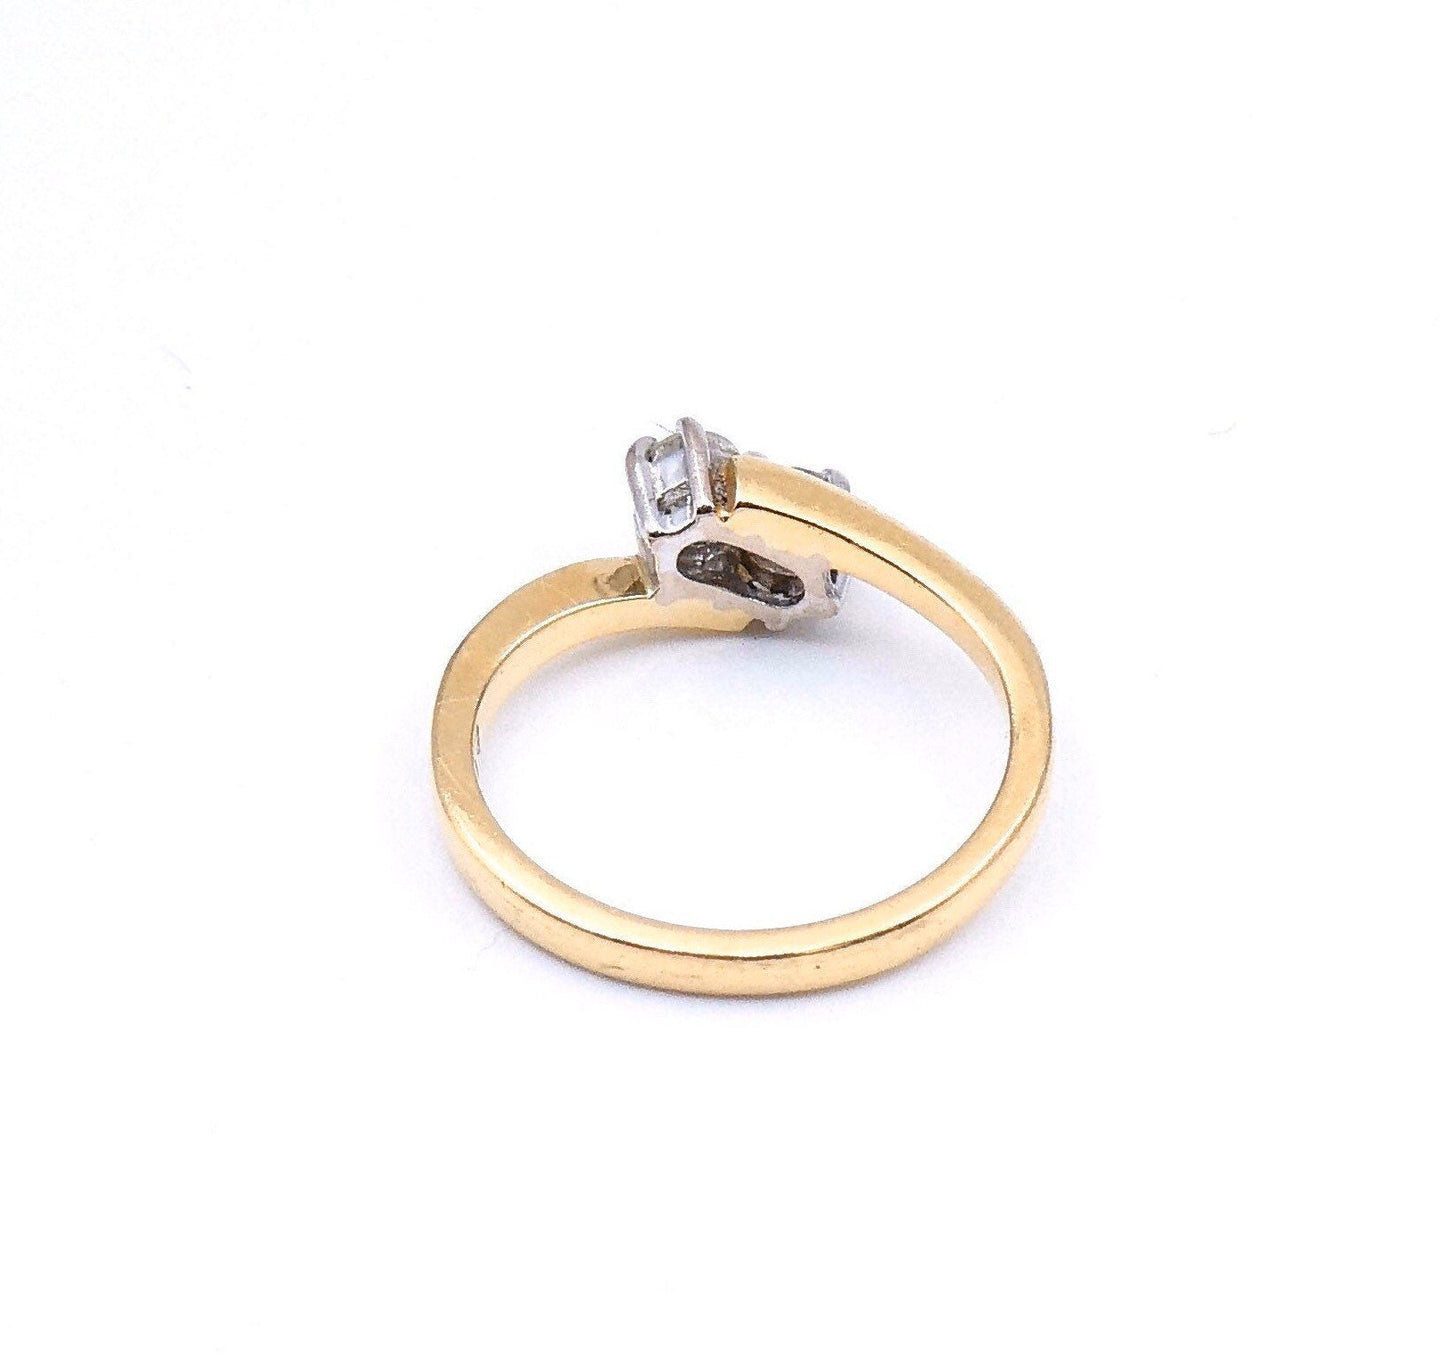 Diamond promise ring, a two stone diamond twist ring in 18kt gold a classic style. - Collected